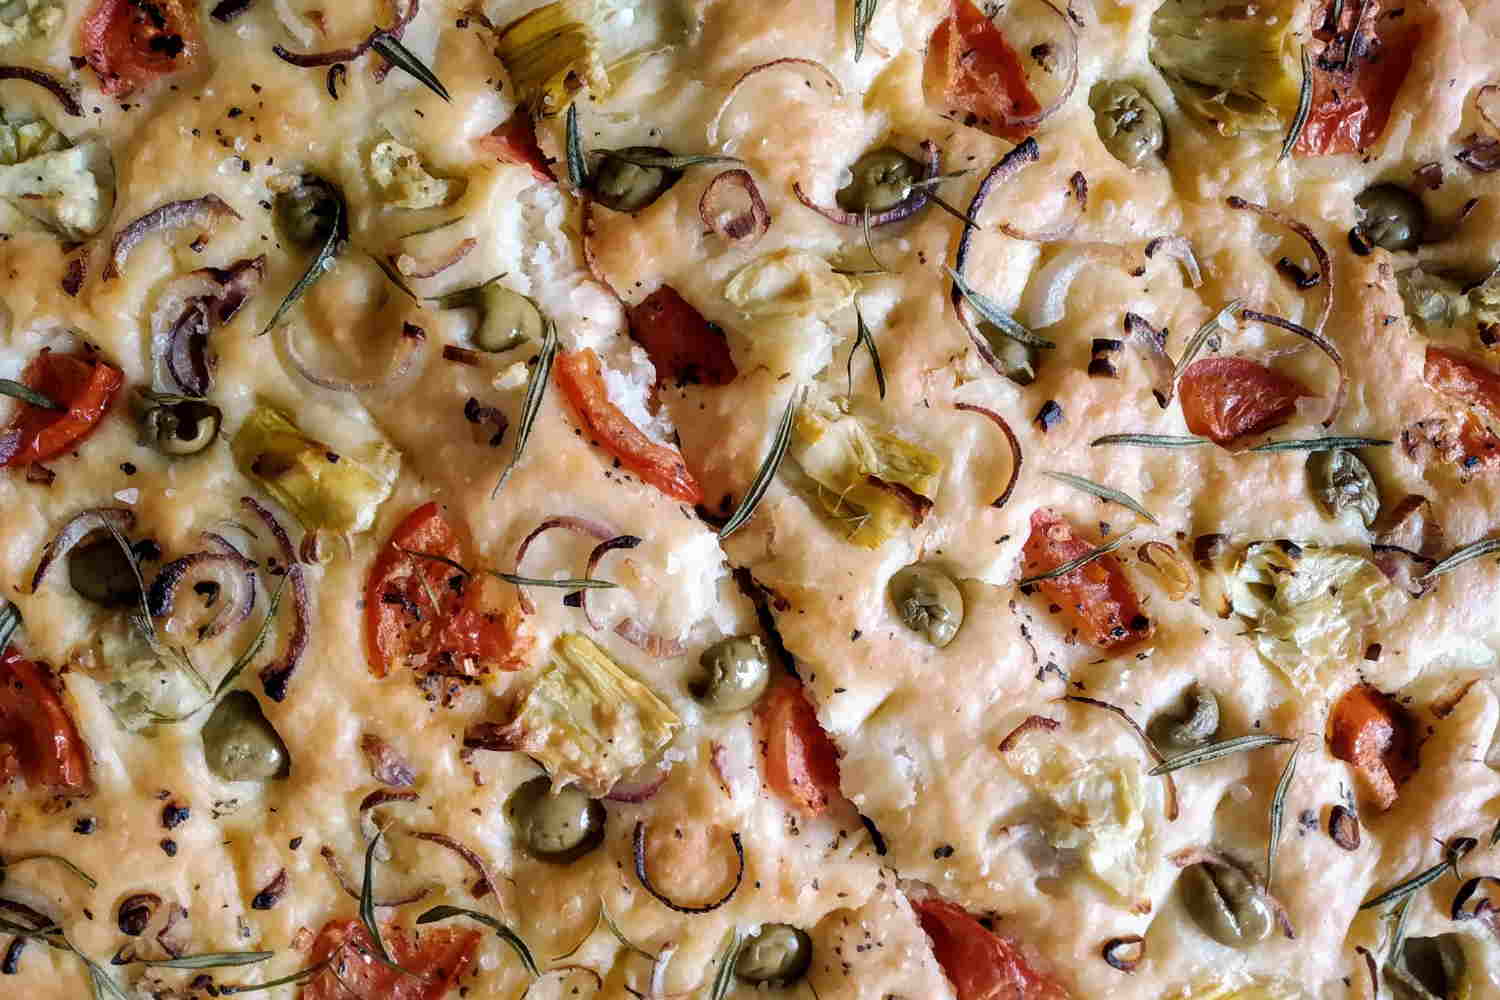 Making Focaccia from Store-Bought Pizza Dough